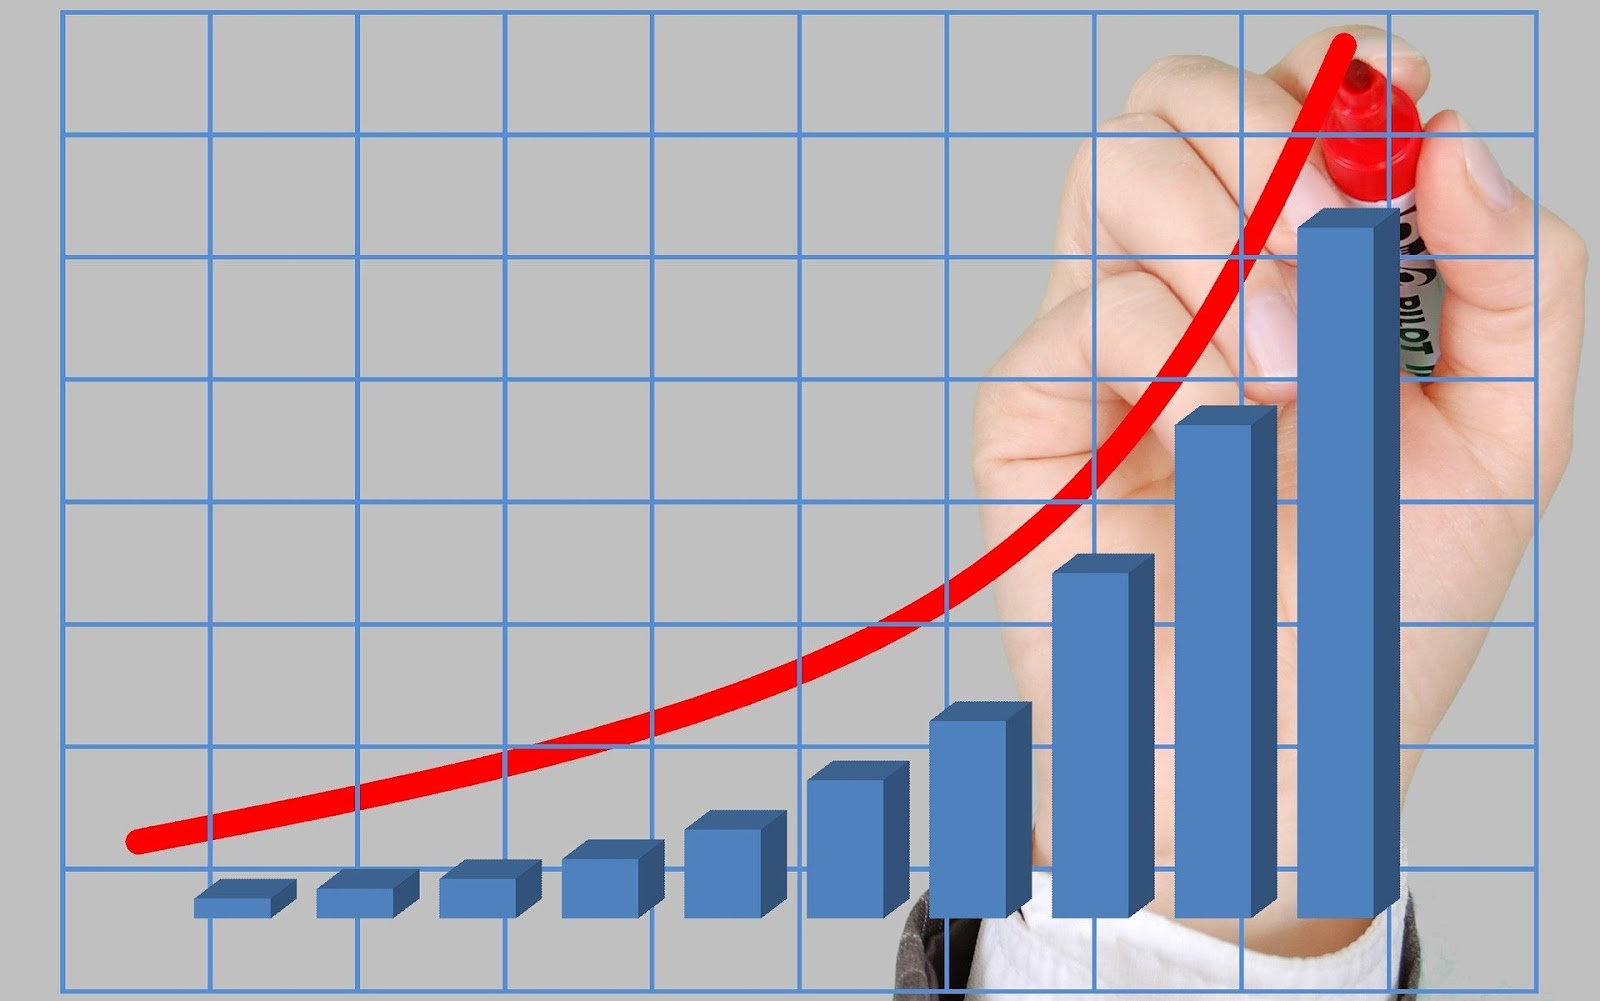 Bar graph increasing to symbolize benefits of a business offering financing to customers